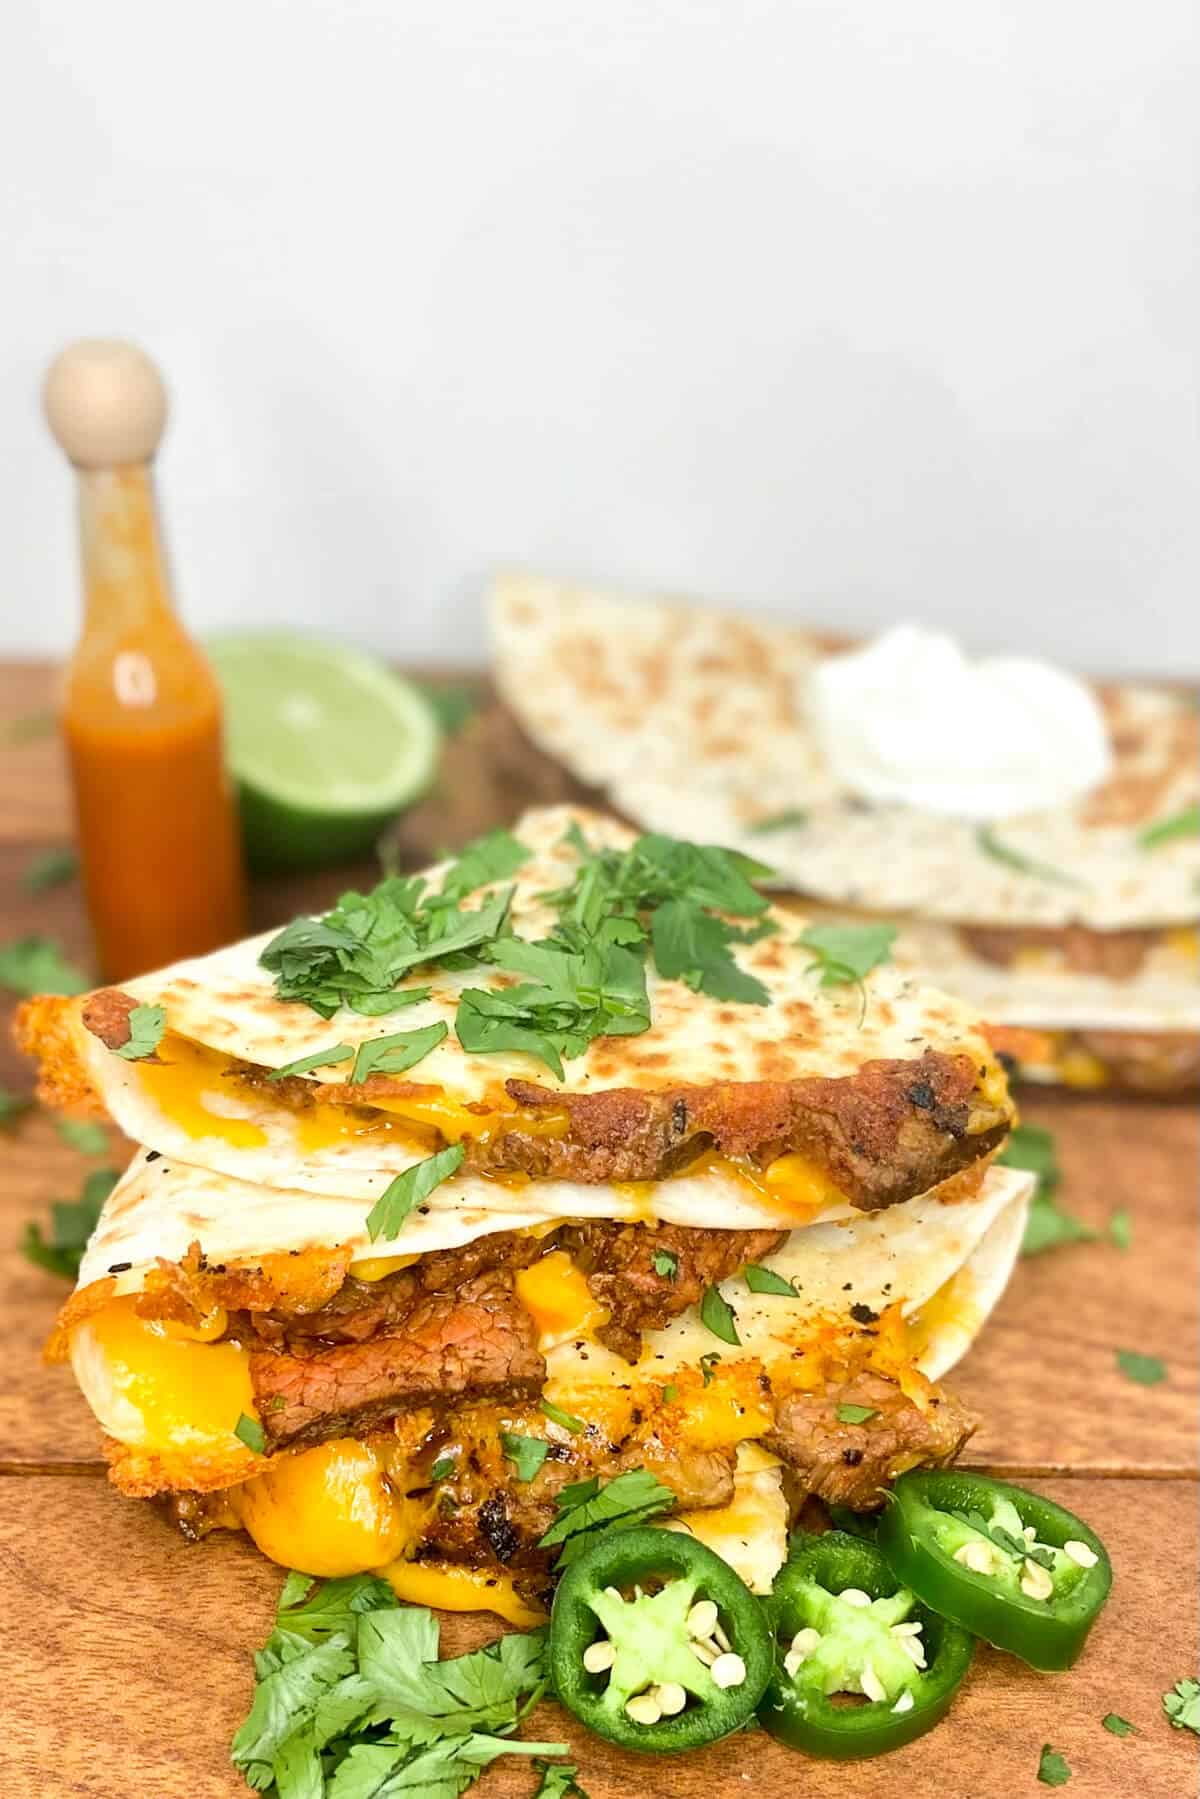 Quesadillas served with herbs sprinkled on top.